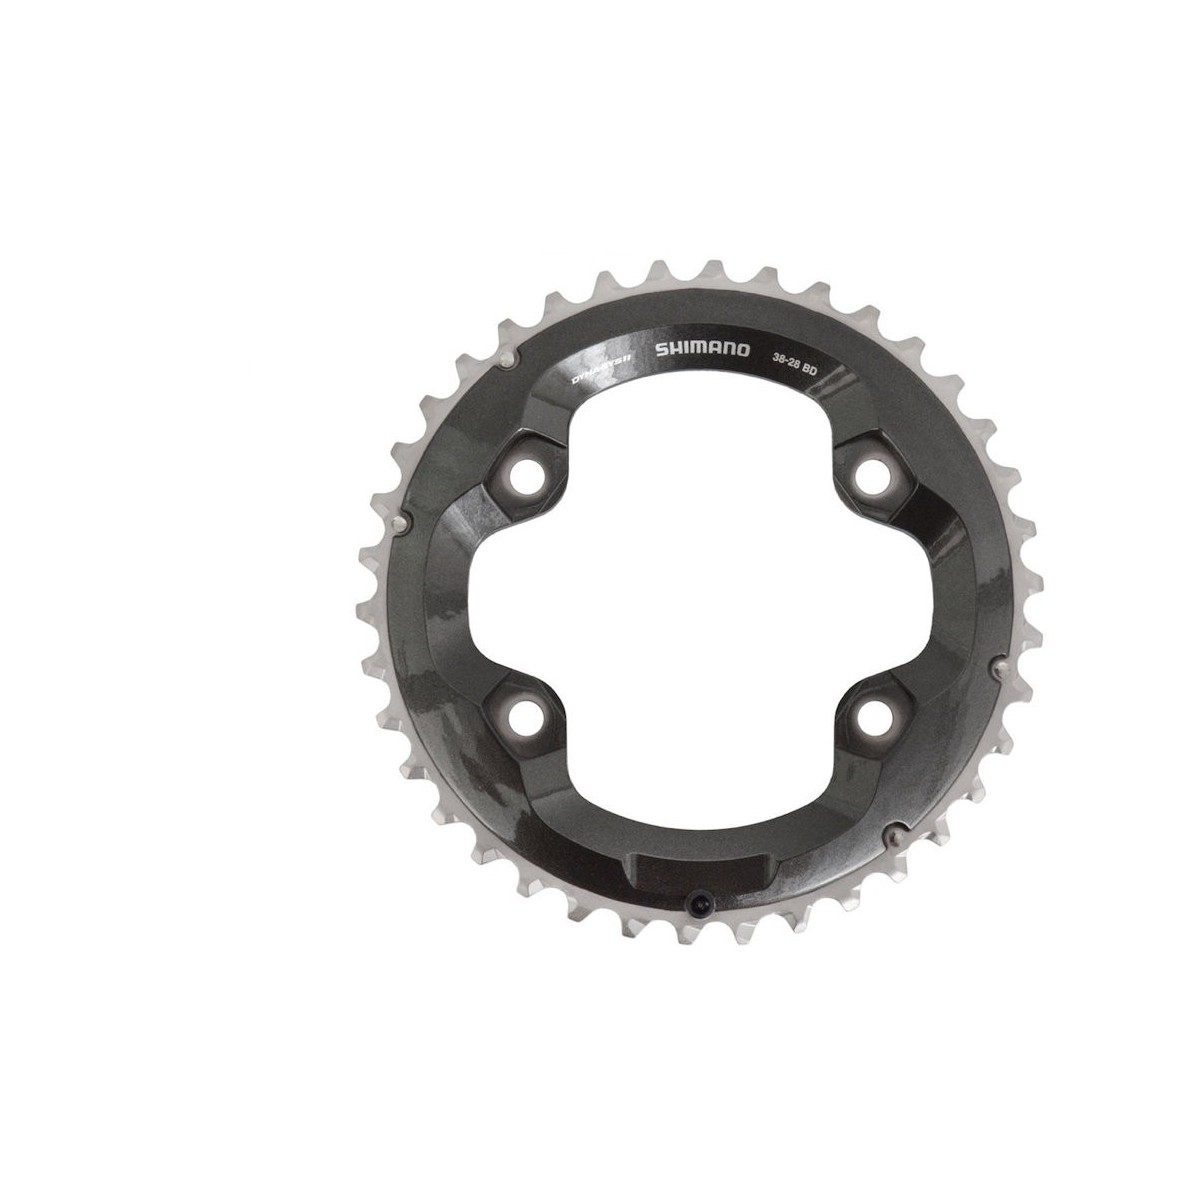 Bicycle chainrings Shimano Deore XT 38T-BD